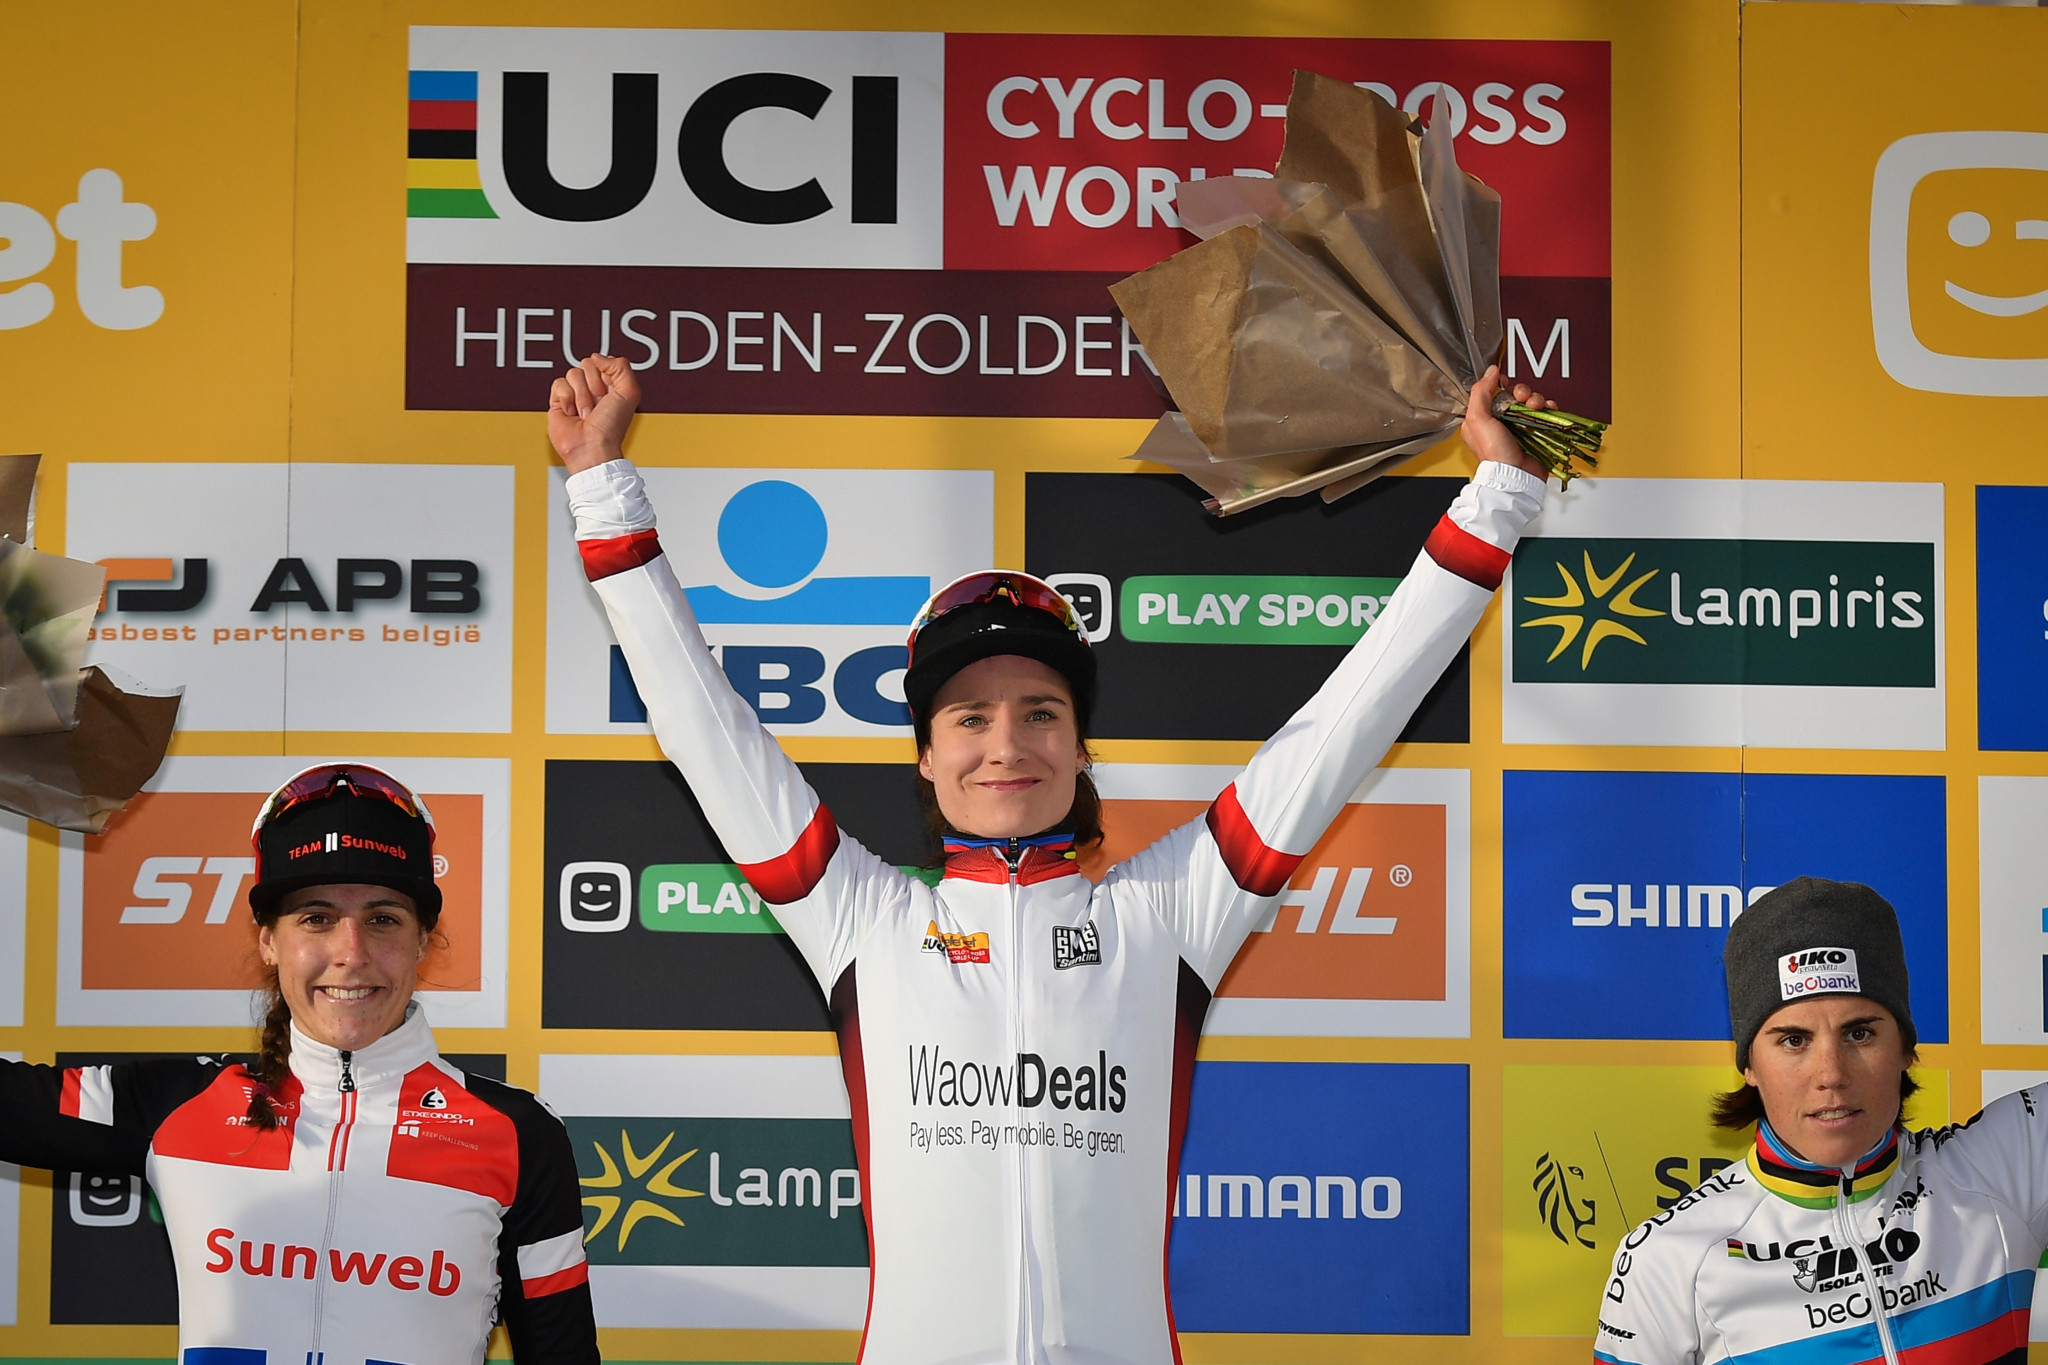 Marianne Vos of The Netherlands won the women's UCI Cyclo-Cross World Cup in Heusden-Zolder to extend her overall lead, with compatriot Lucinda Brand finishing second and Belgium Sanne Cant third ©Getty Images 